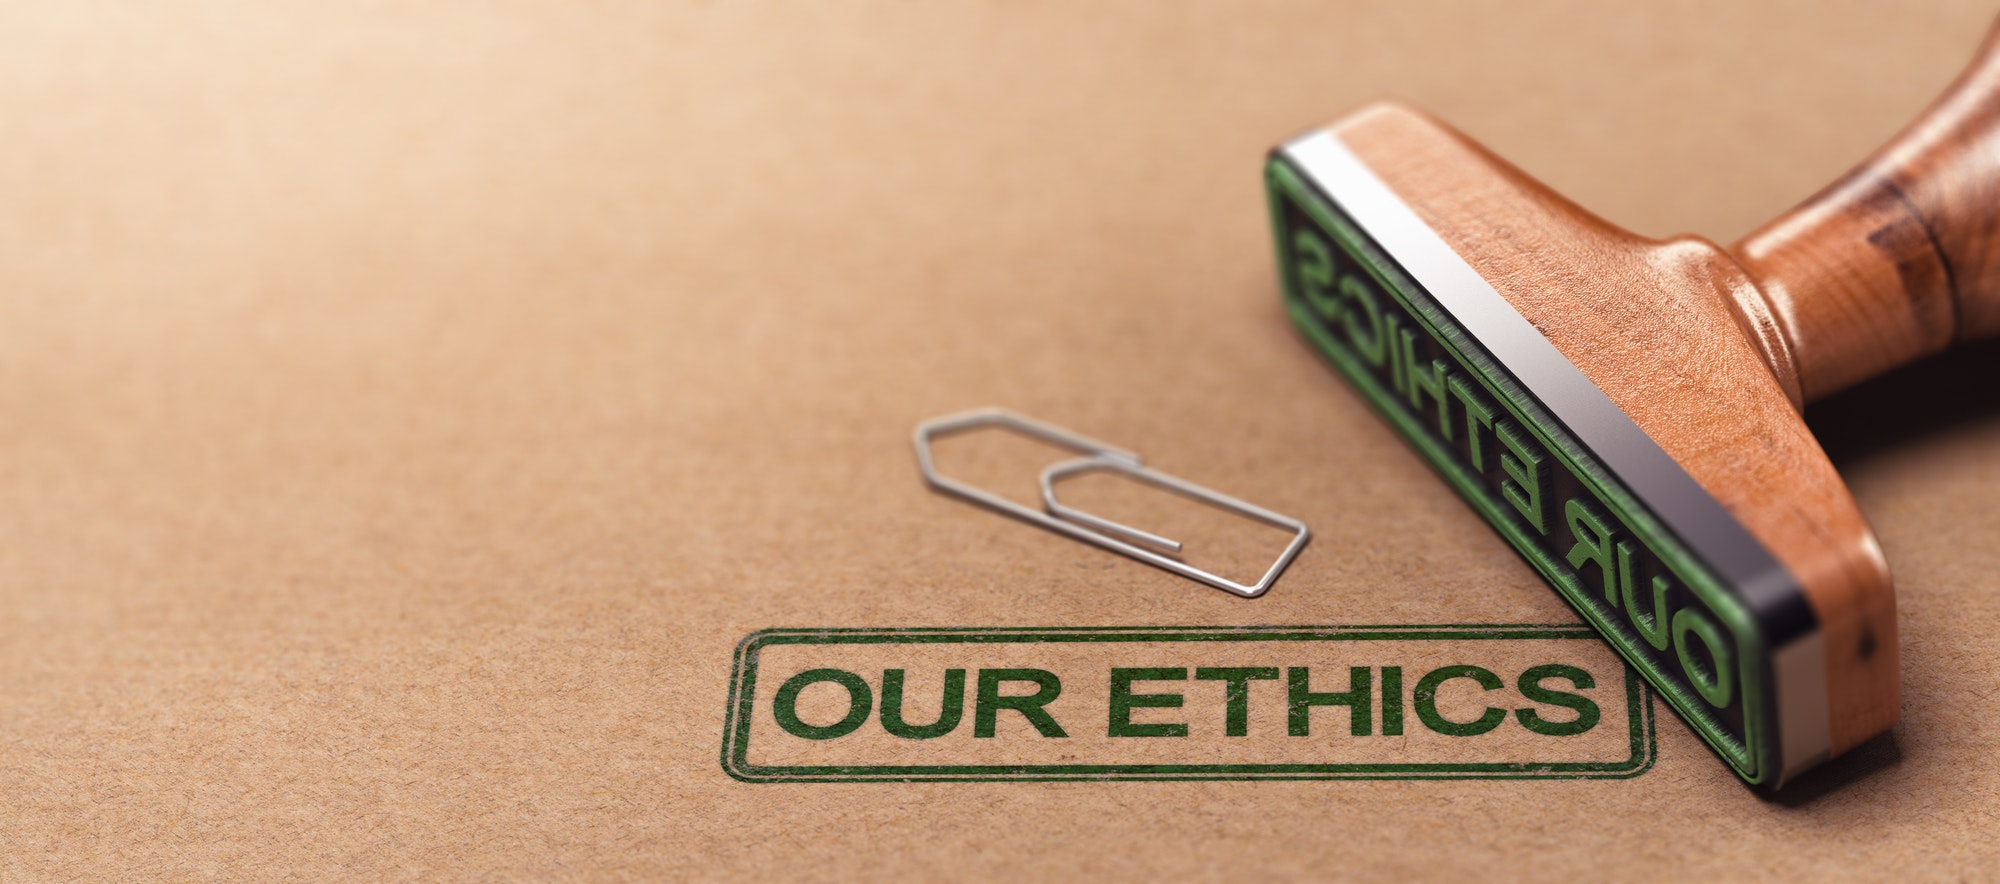 Our Ethics, Business Moral Principles lead us to being honest.